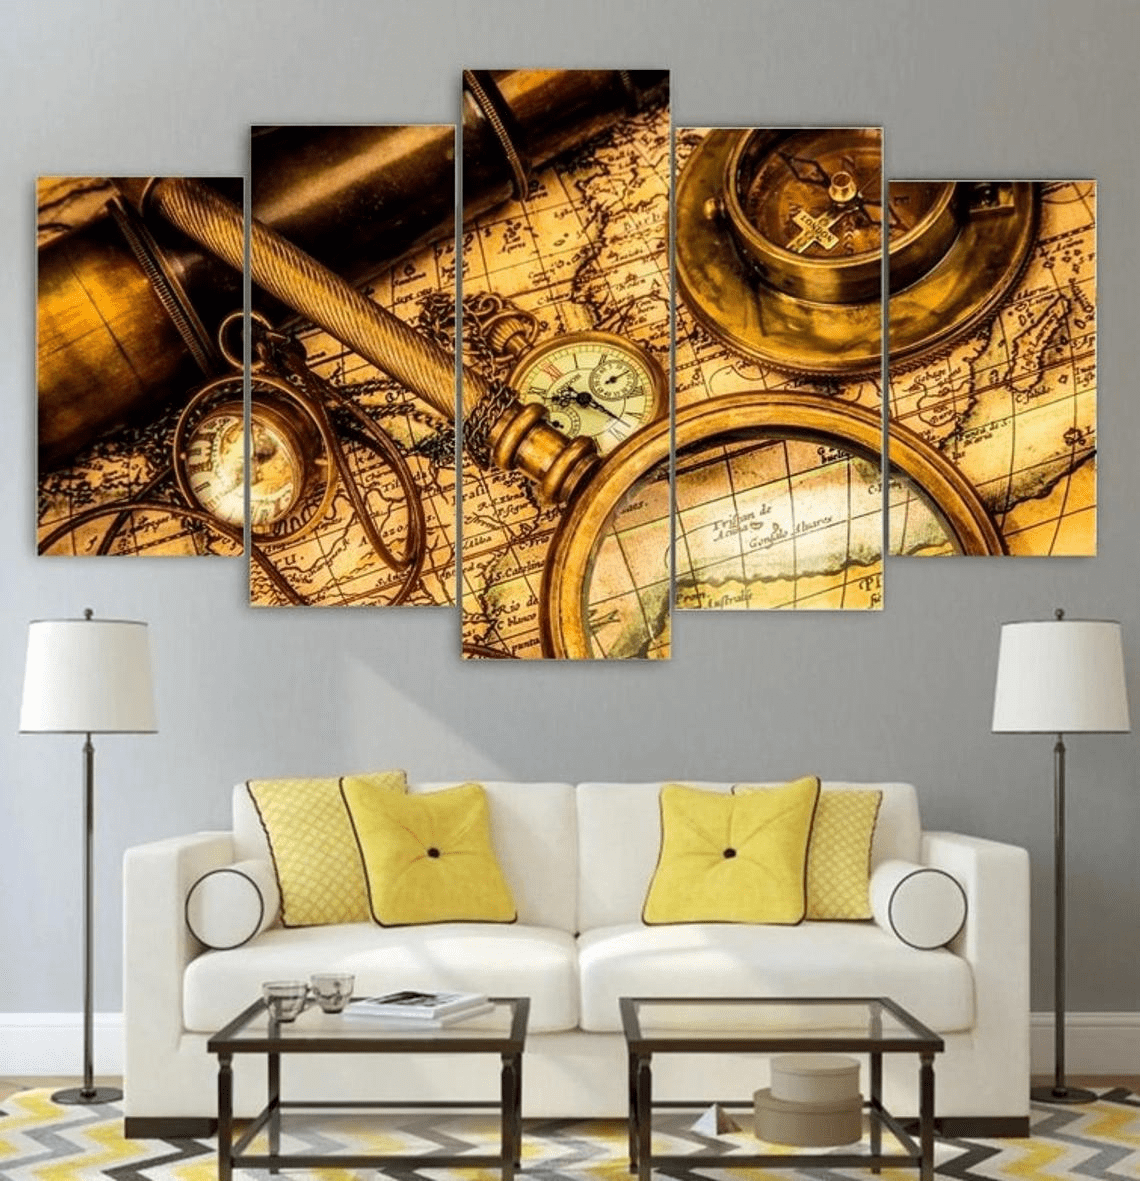 Nautical Map Wall Art Canvas Framed Print- Home Vintage Compass - World Map Decor - Gift Idea Painting Poster 5 Panel